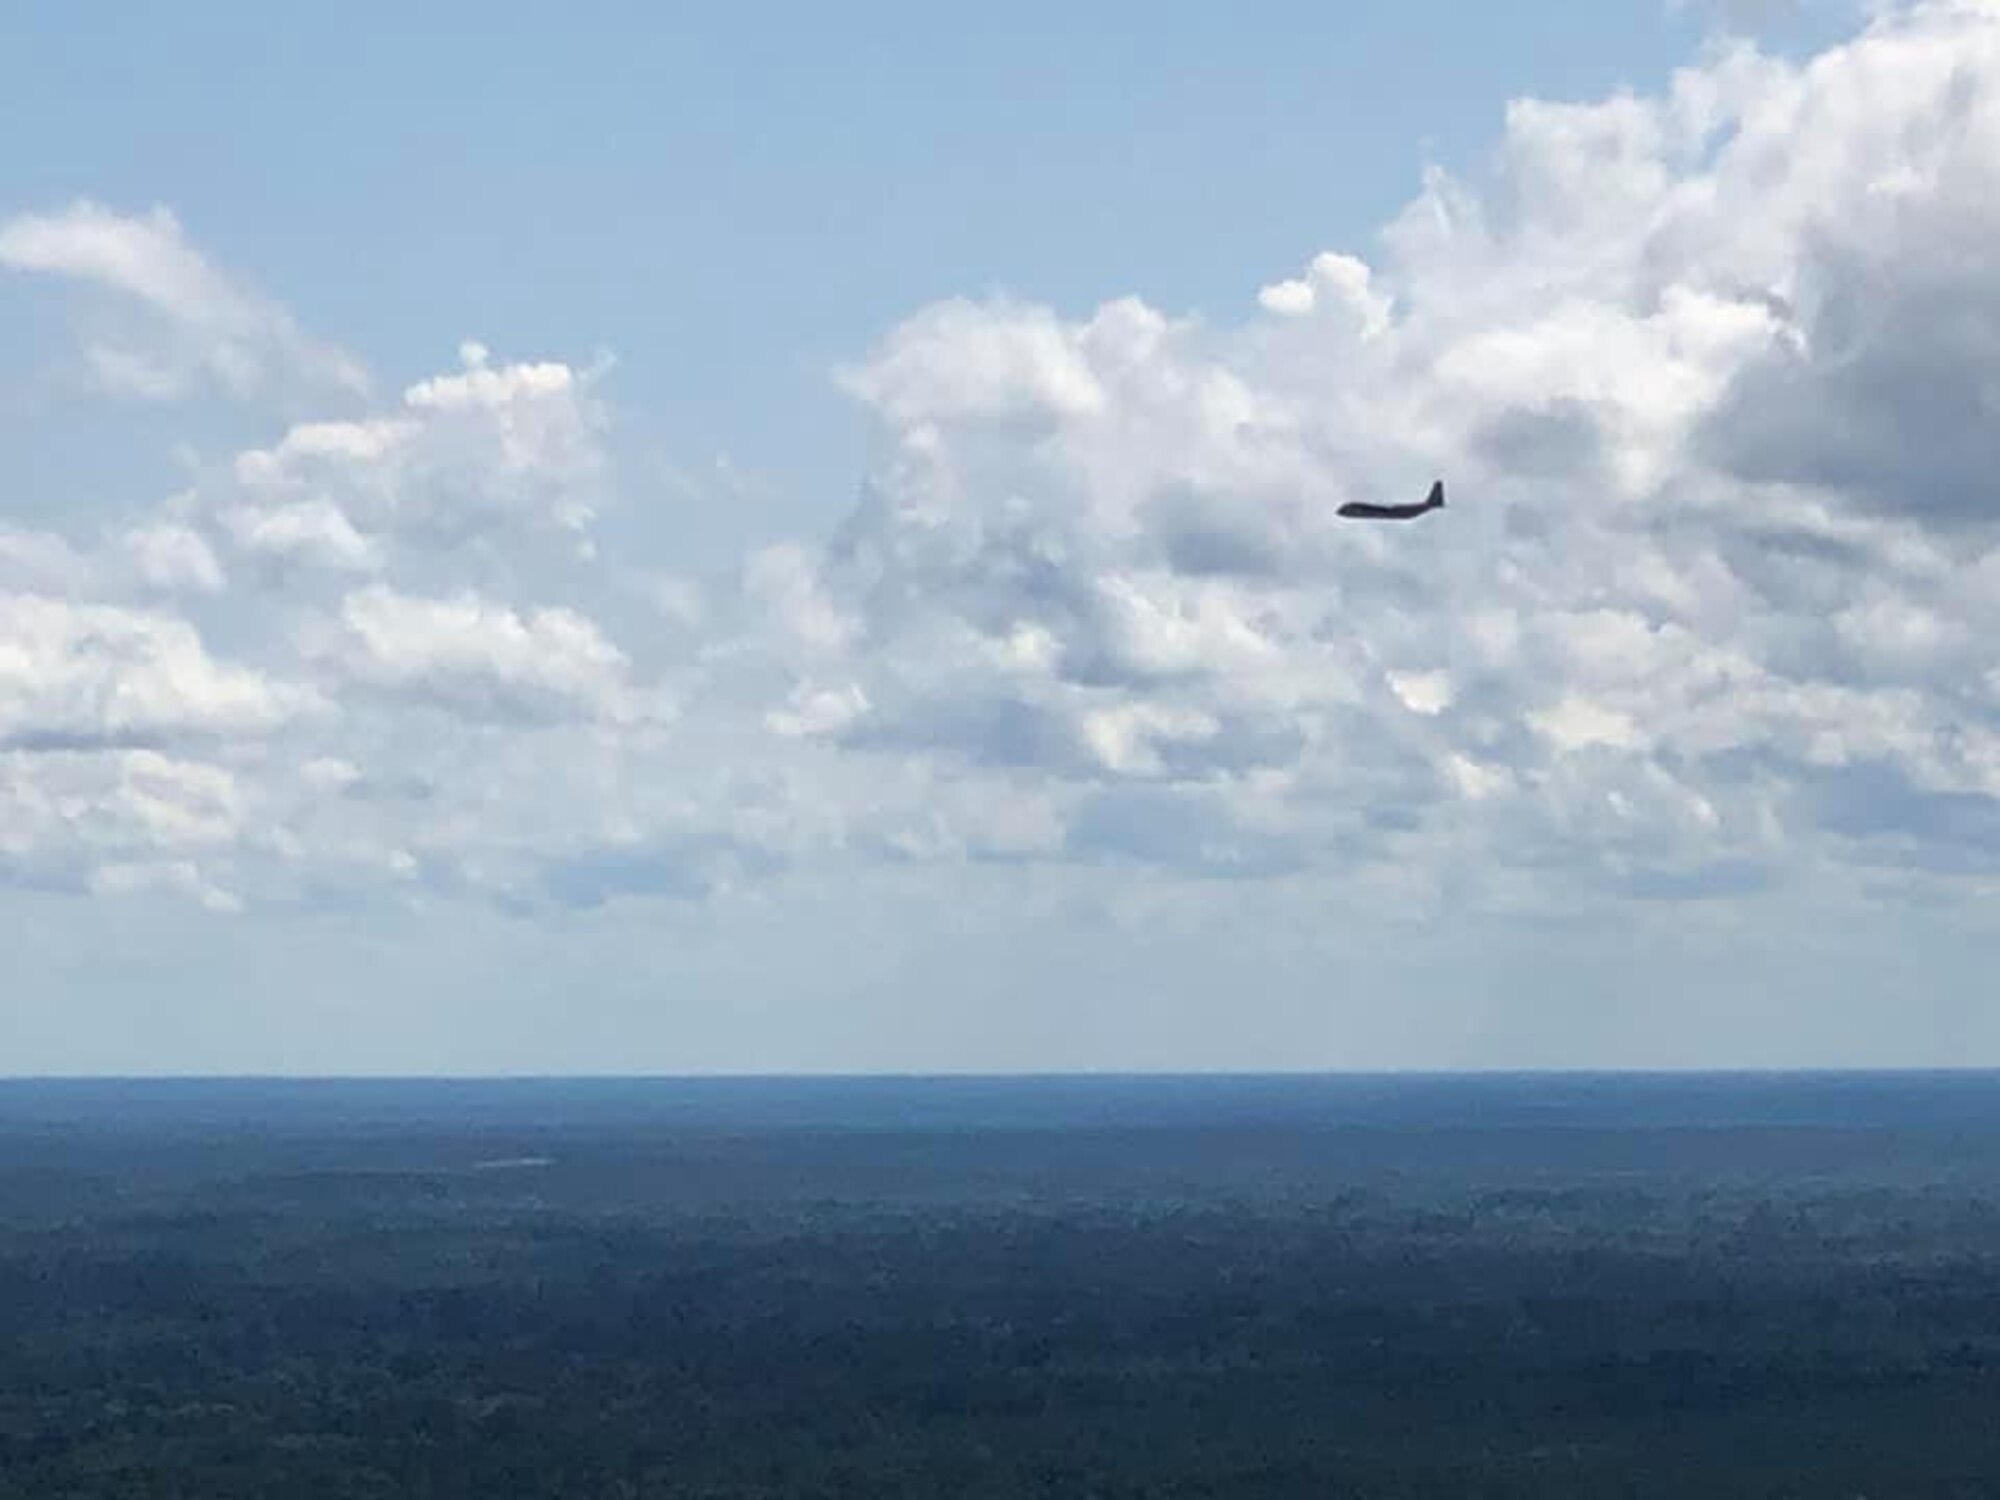 A C-130J Super Hercules aircraft from Little Rock Air Force Base, Arkansas, flies over Geronimo Drop Zone in support of airborne operations at the Joint Readiness Training Center in Fort Polk, Louisiana, May 26, 2020. As training environments across the Department of Defense adjust operations to fit a new abnormal, LRAFB continues to provide rapid global mobility support in a world influenced by the outbreak of COVID-19. (Courtesy photo)